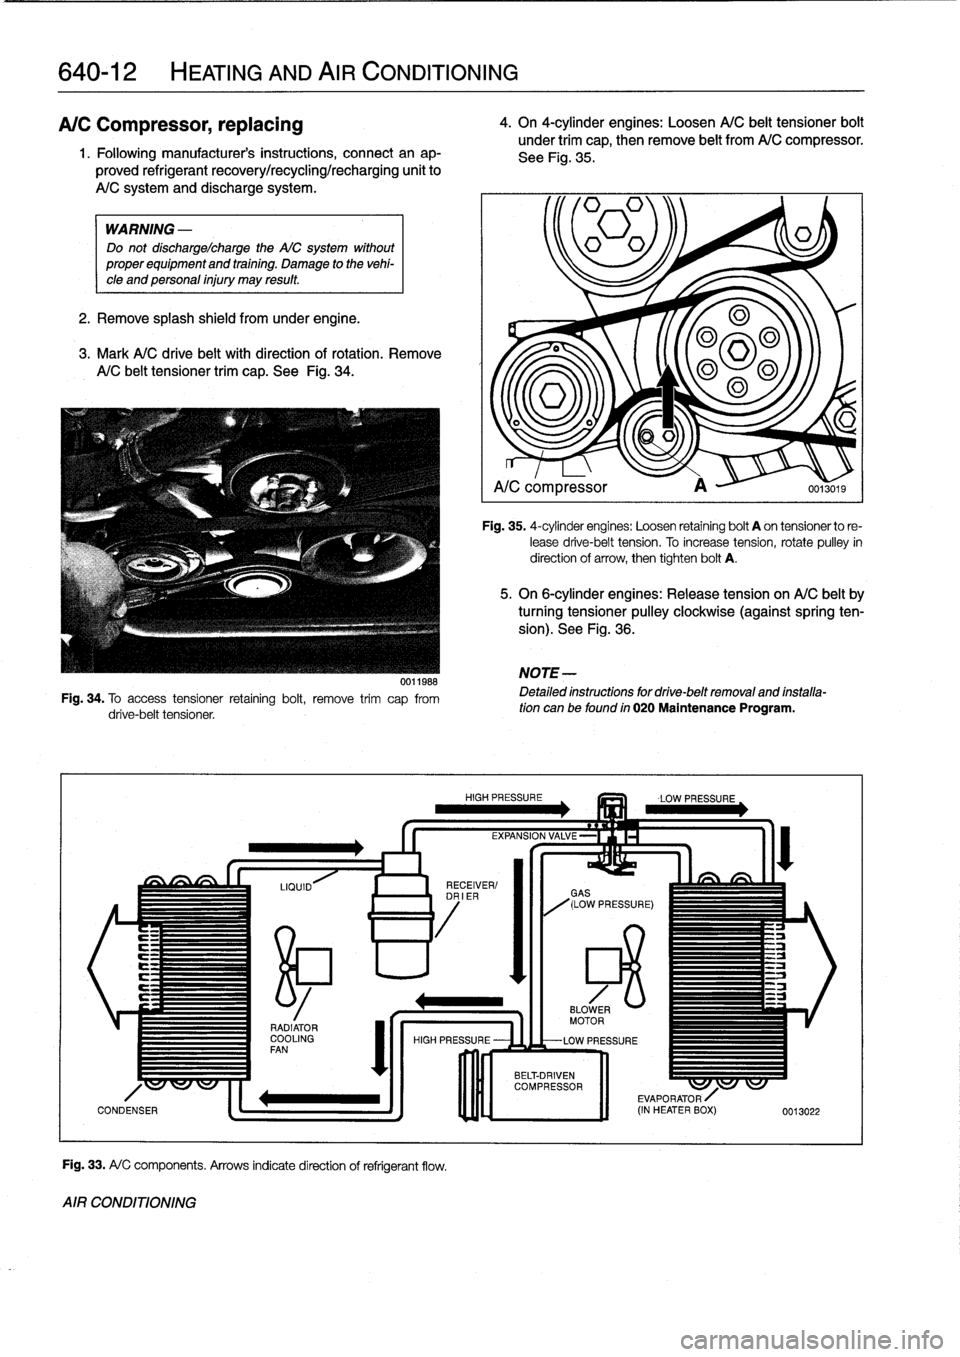 BMW 318i 1997 E36 Owners Manual 
640-12

	

HEATING
AND
AIR
CONDITIONING

A/C
Compressor,
replacing

1
.
Followingmanufacturers
instructions,
connectanap-

proved
refrigerant
recovery/recycling/recharging
unit
to

A/C
system
and
di